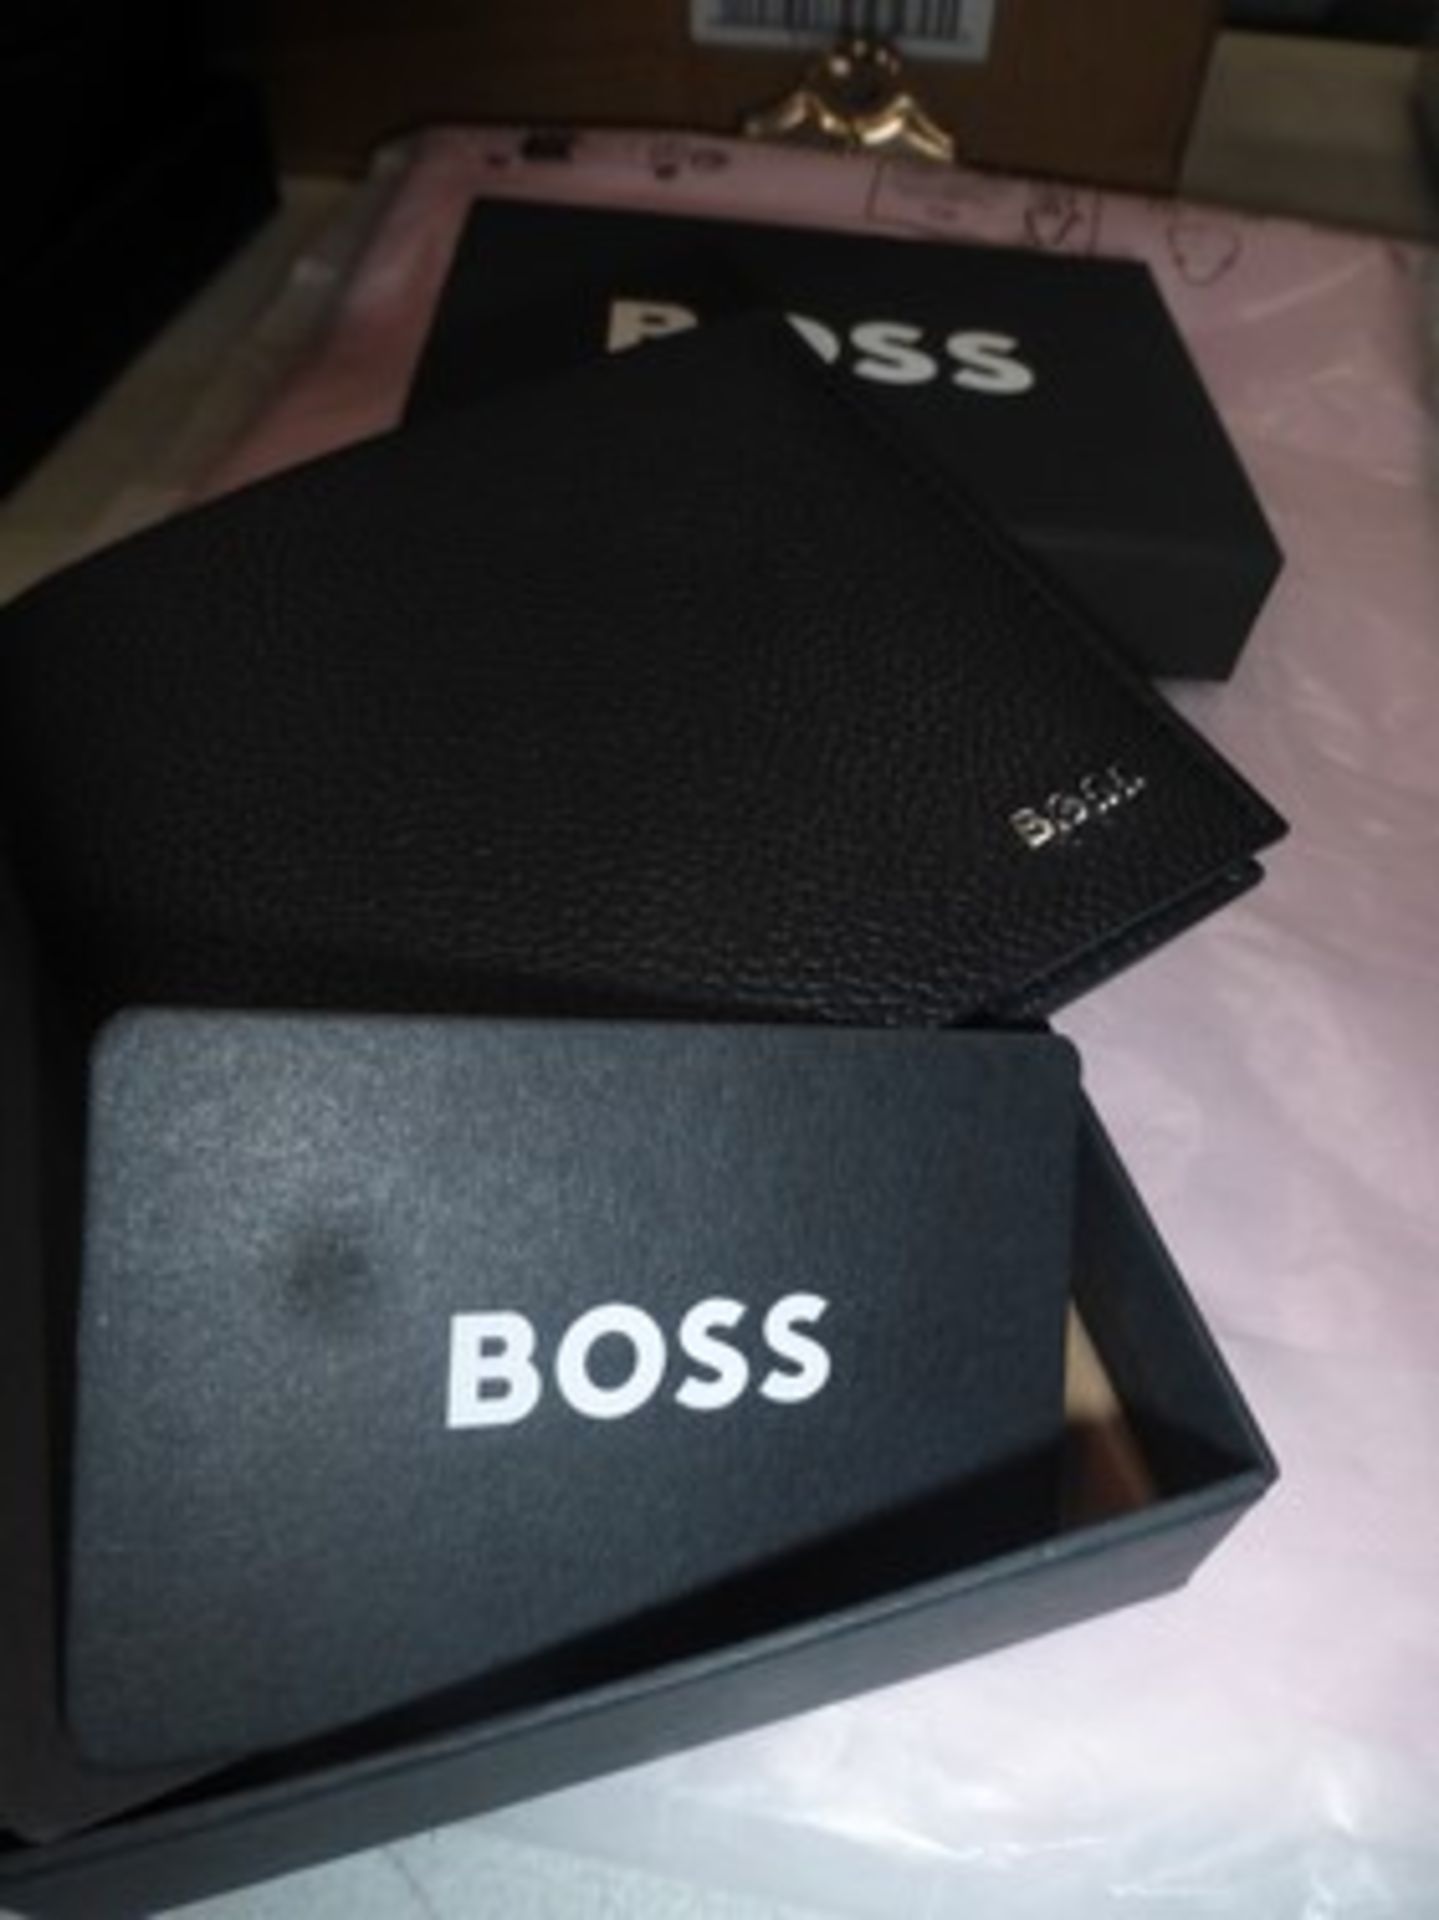 1 x Hugo Boss 'highway 8CC' leather wallet - new in box (C13B)